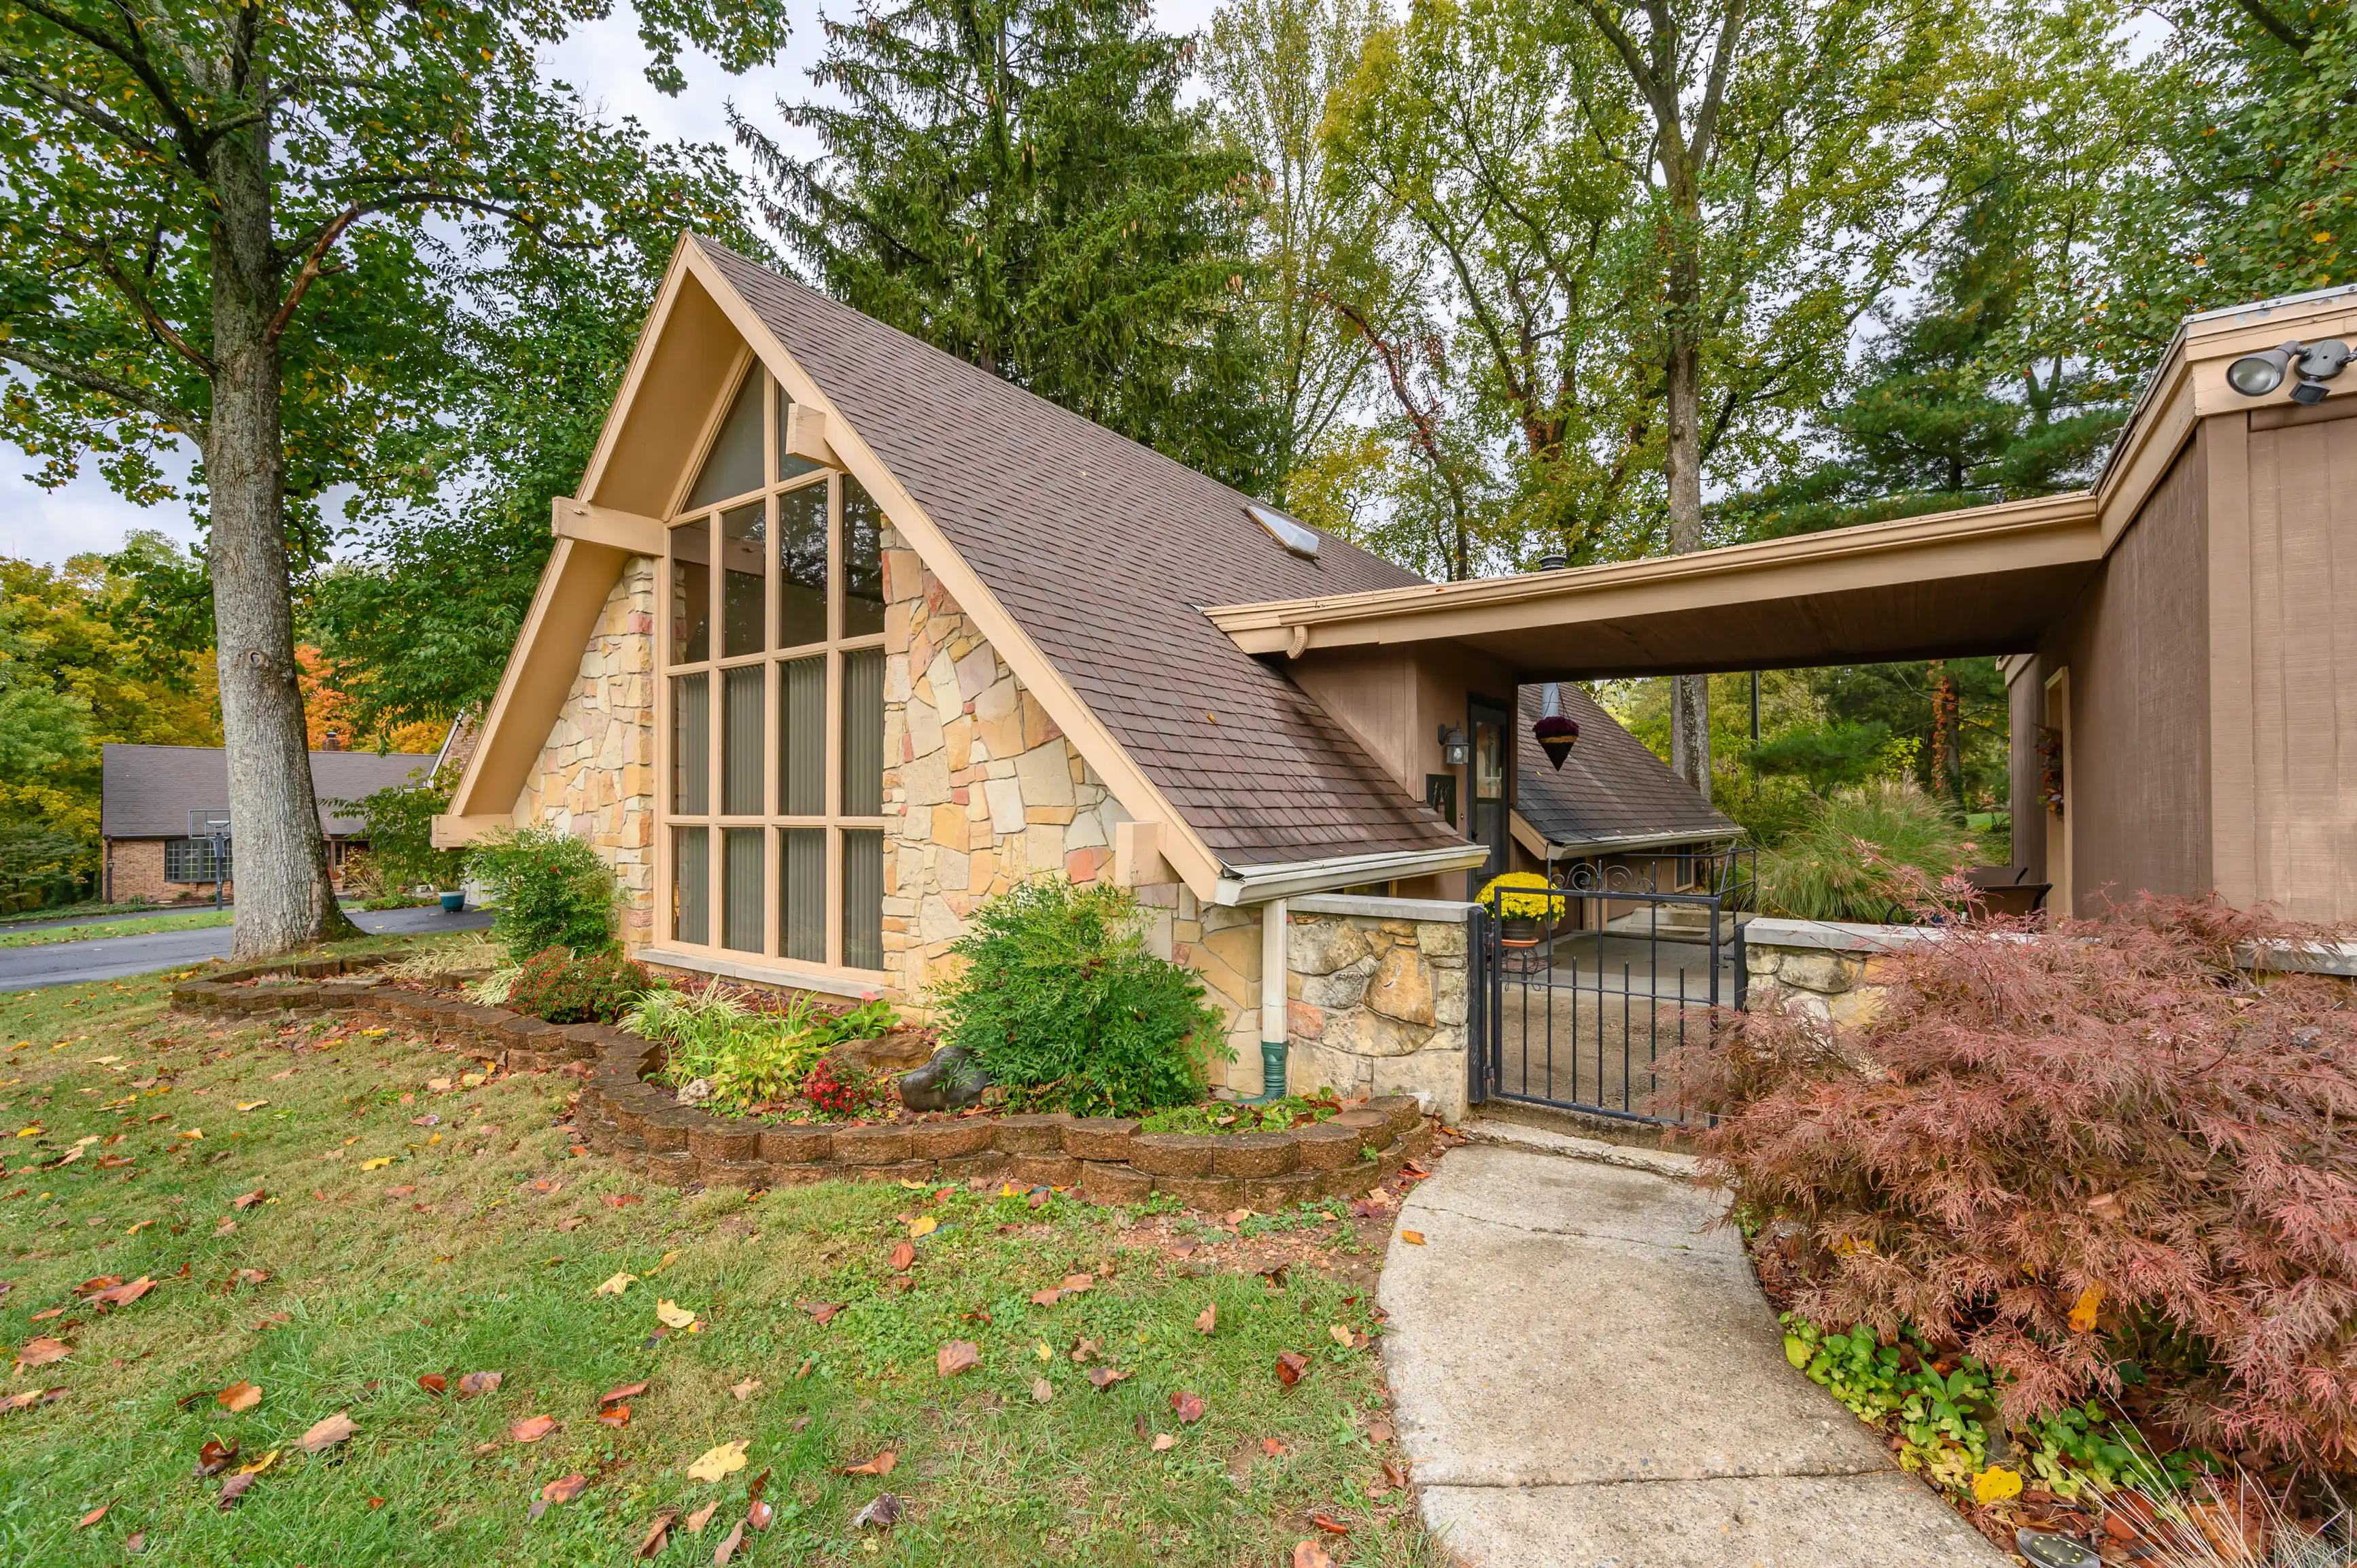 Unique A-frame house with large windows surrounded by autumn foliage, featuring a stone facade and an attached carport.